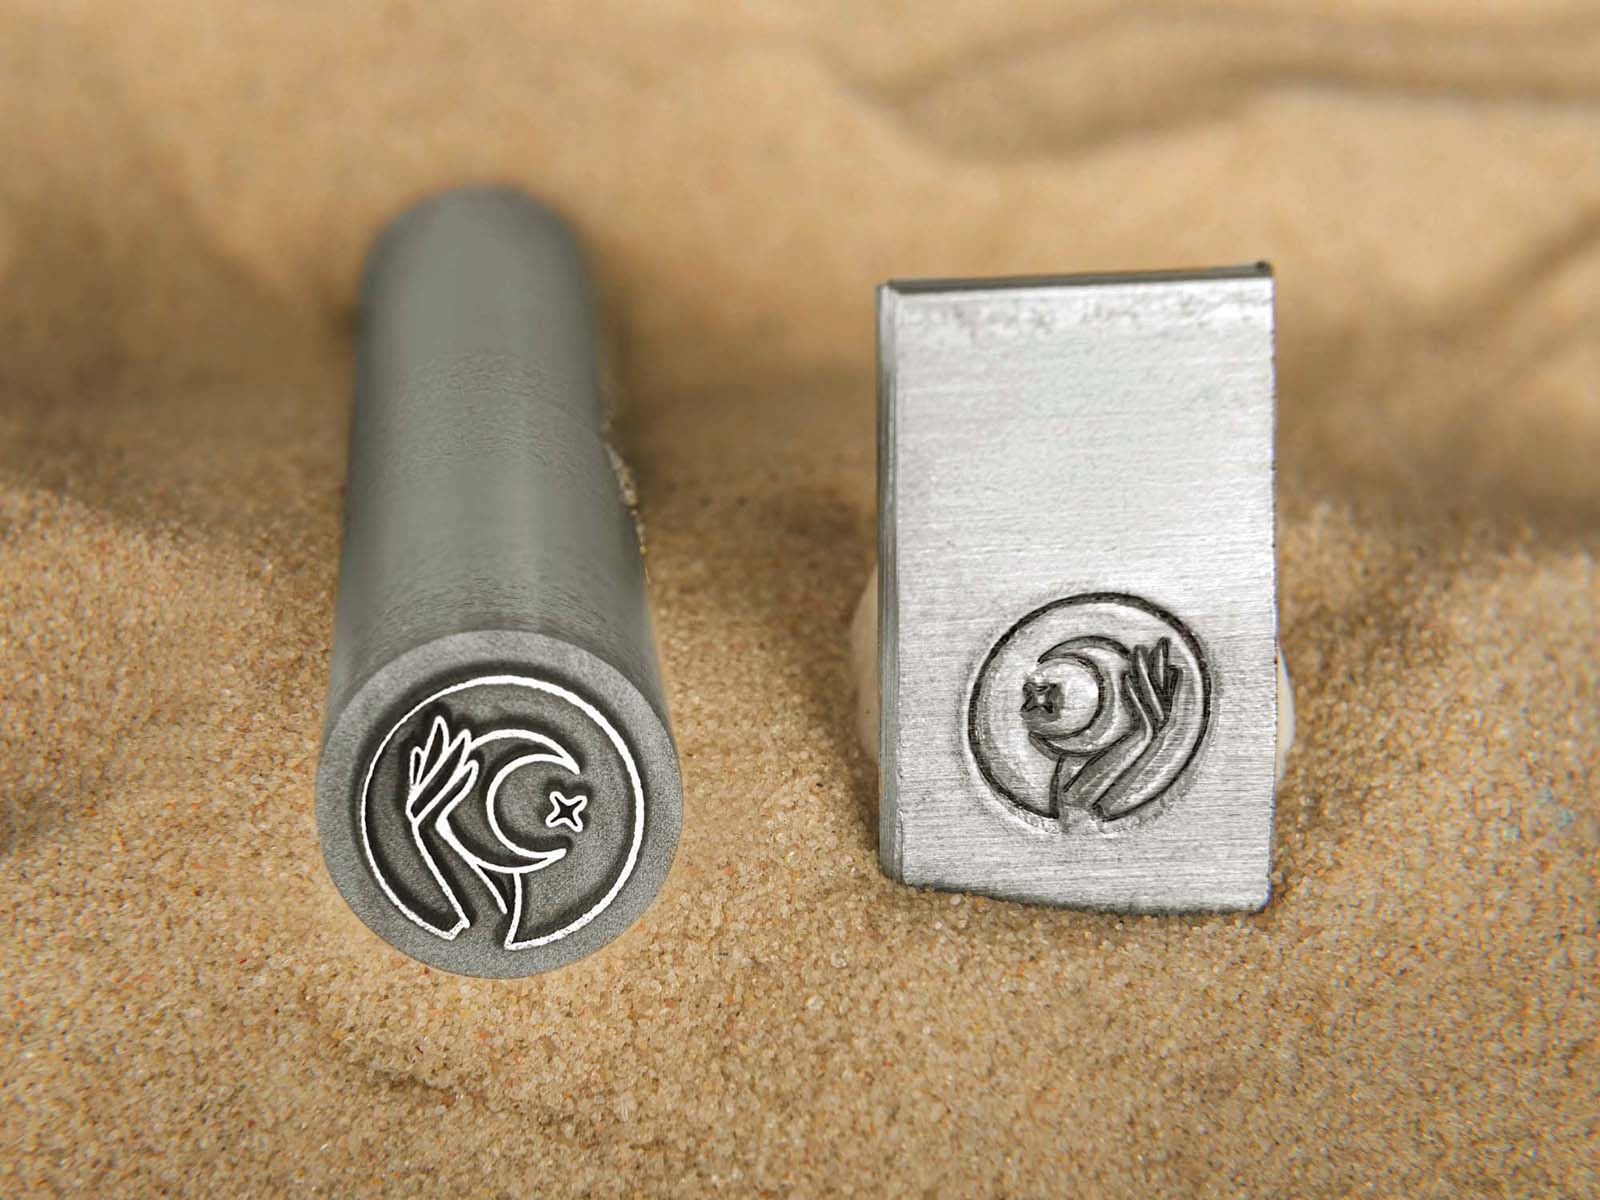 Hand Steel Personal Design Punch. Custom steel dies made to mark gold, silver, aluminum, copper, zinc, wood, leather, and more as easy as striking a hammer. Our stamps are made from high-quality, hardened steel to ensure durability and long-lasting performance.  Whether you desire a personal stamp featuring your signature, initials, logo, or any custom design, we can bring your vision to life.